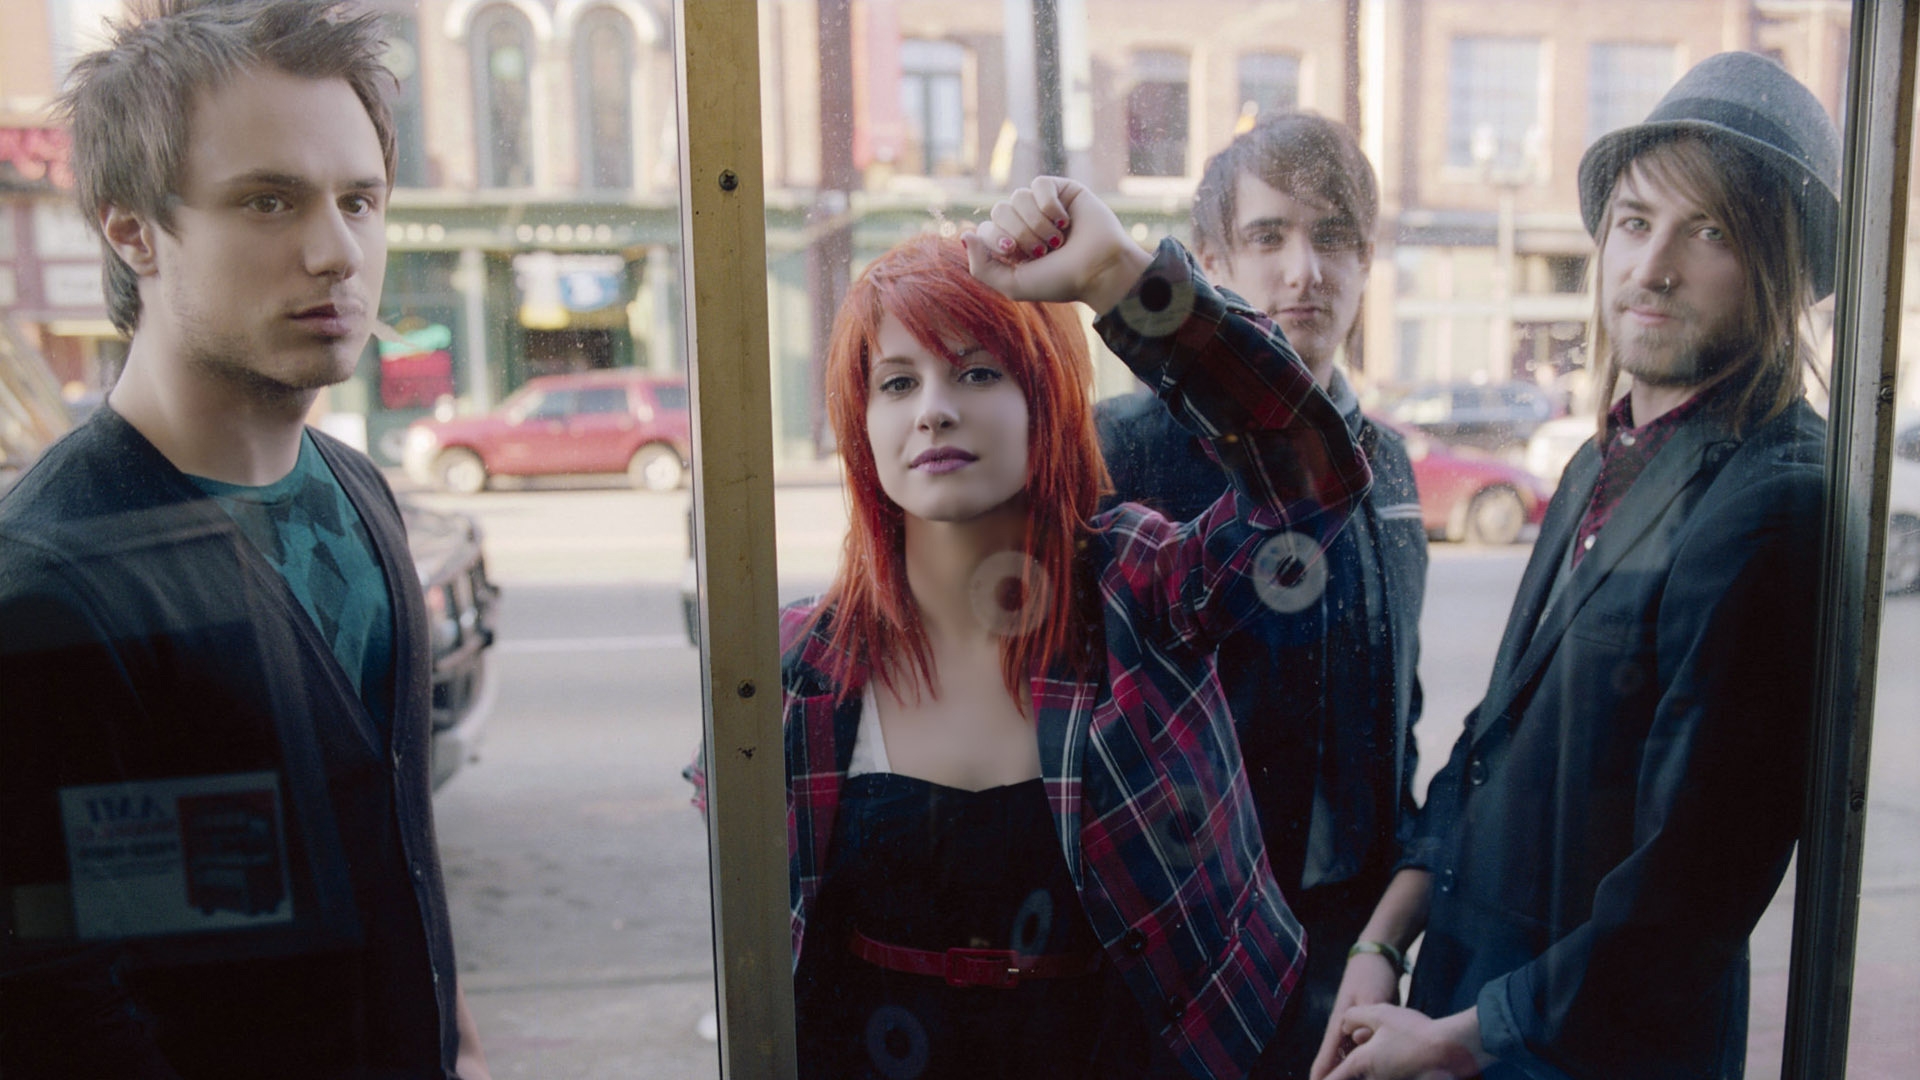 Paramore Band for 1920 x 1080 HDTV 1080p resolution